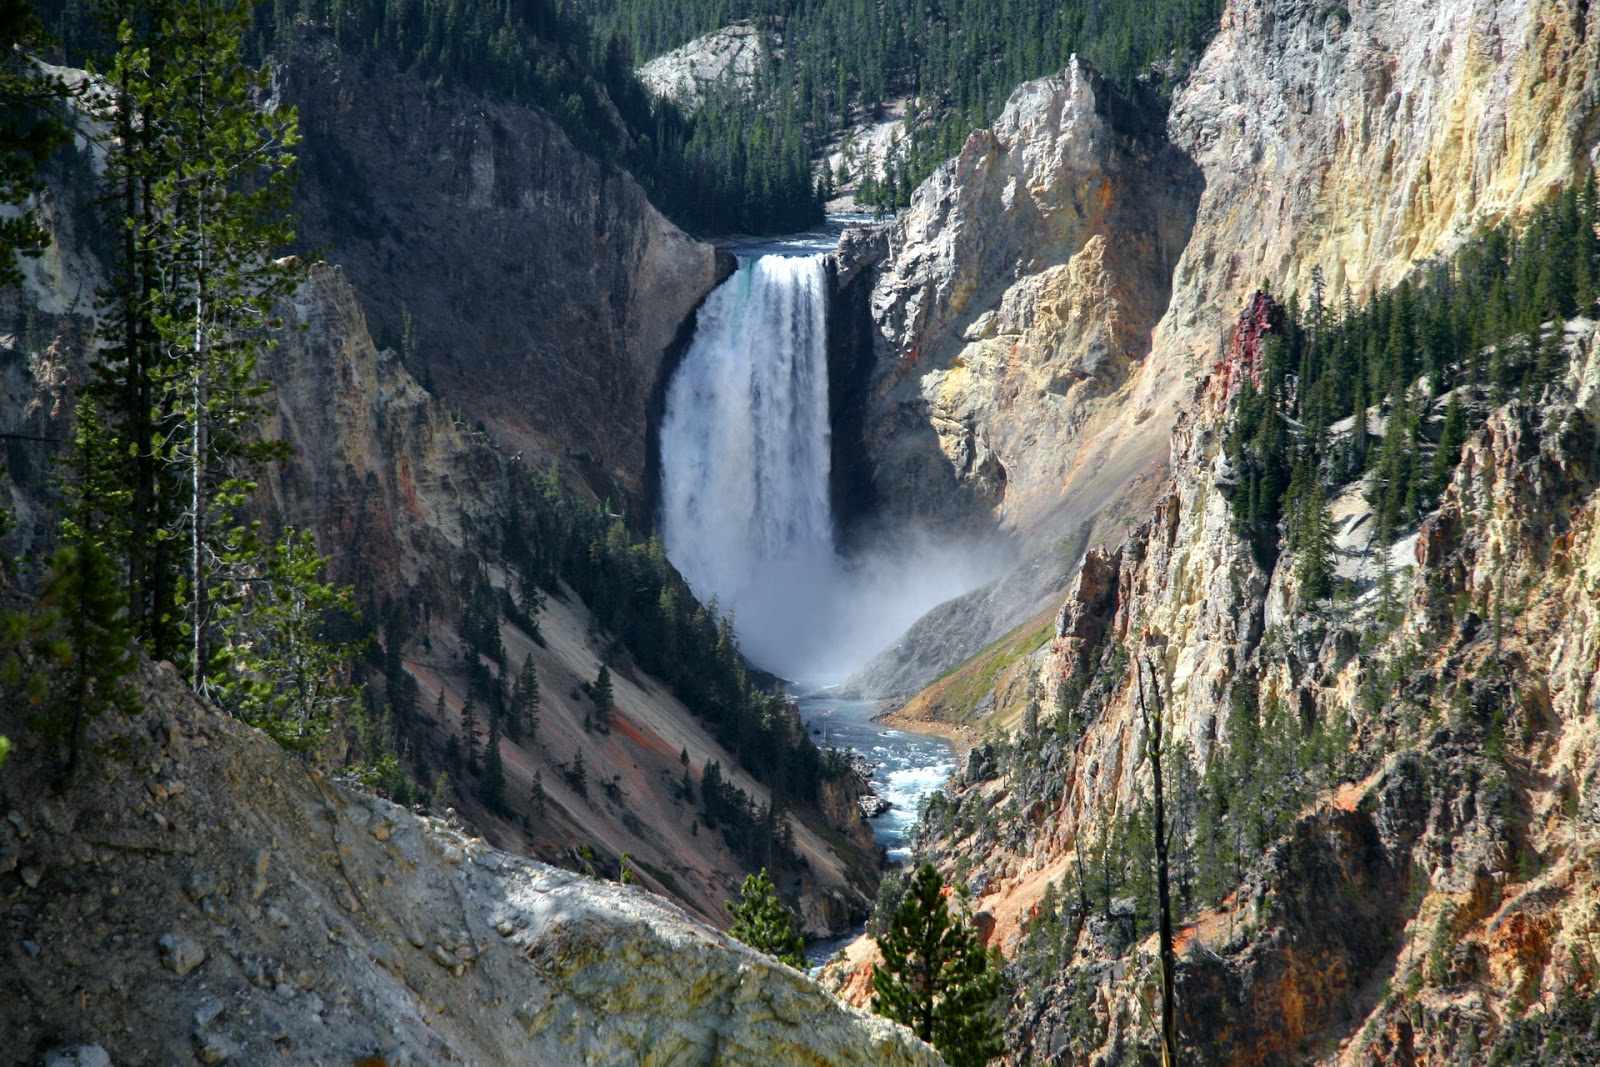 World Travel Places: Yellowstone National Park
